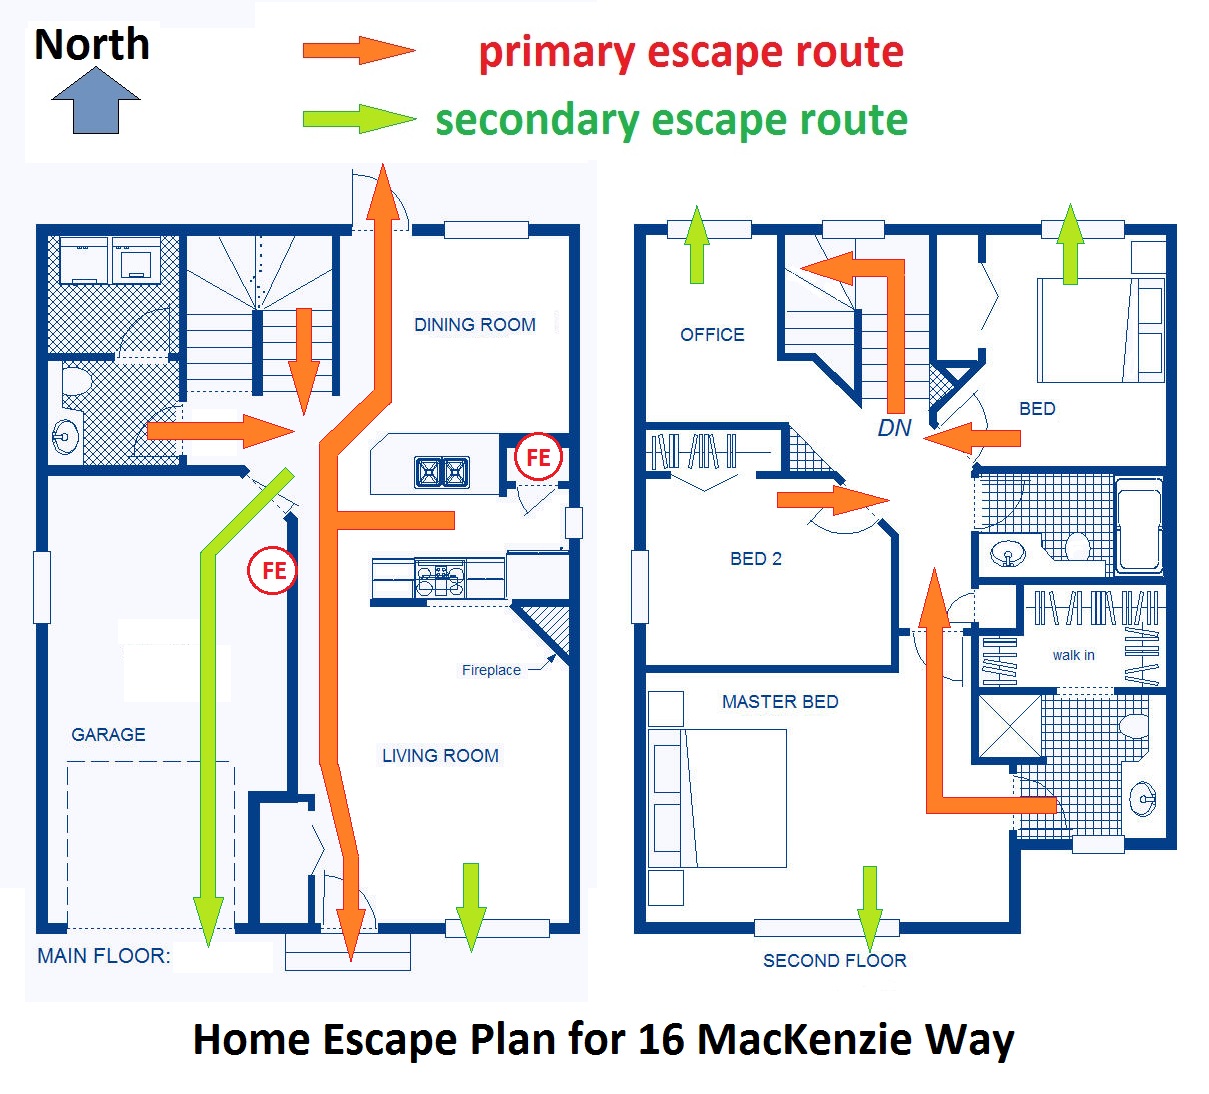 Example Of Fire Evacuation Plan For Home